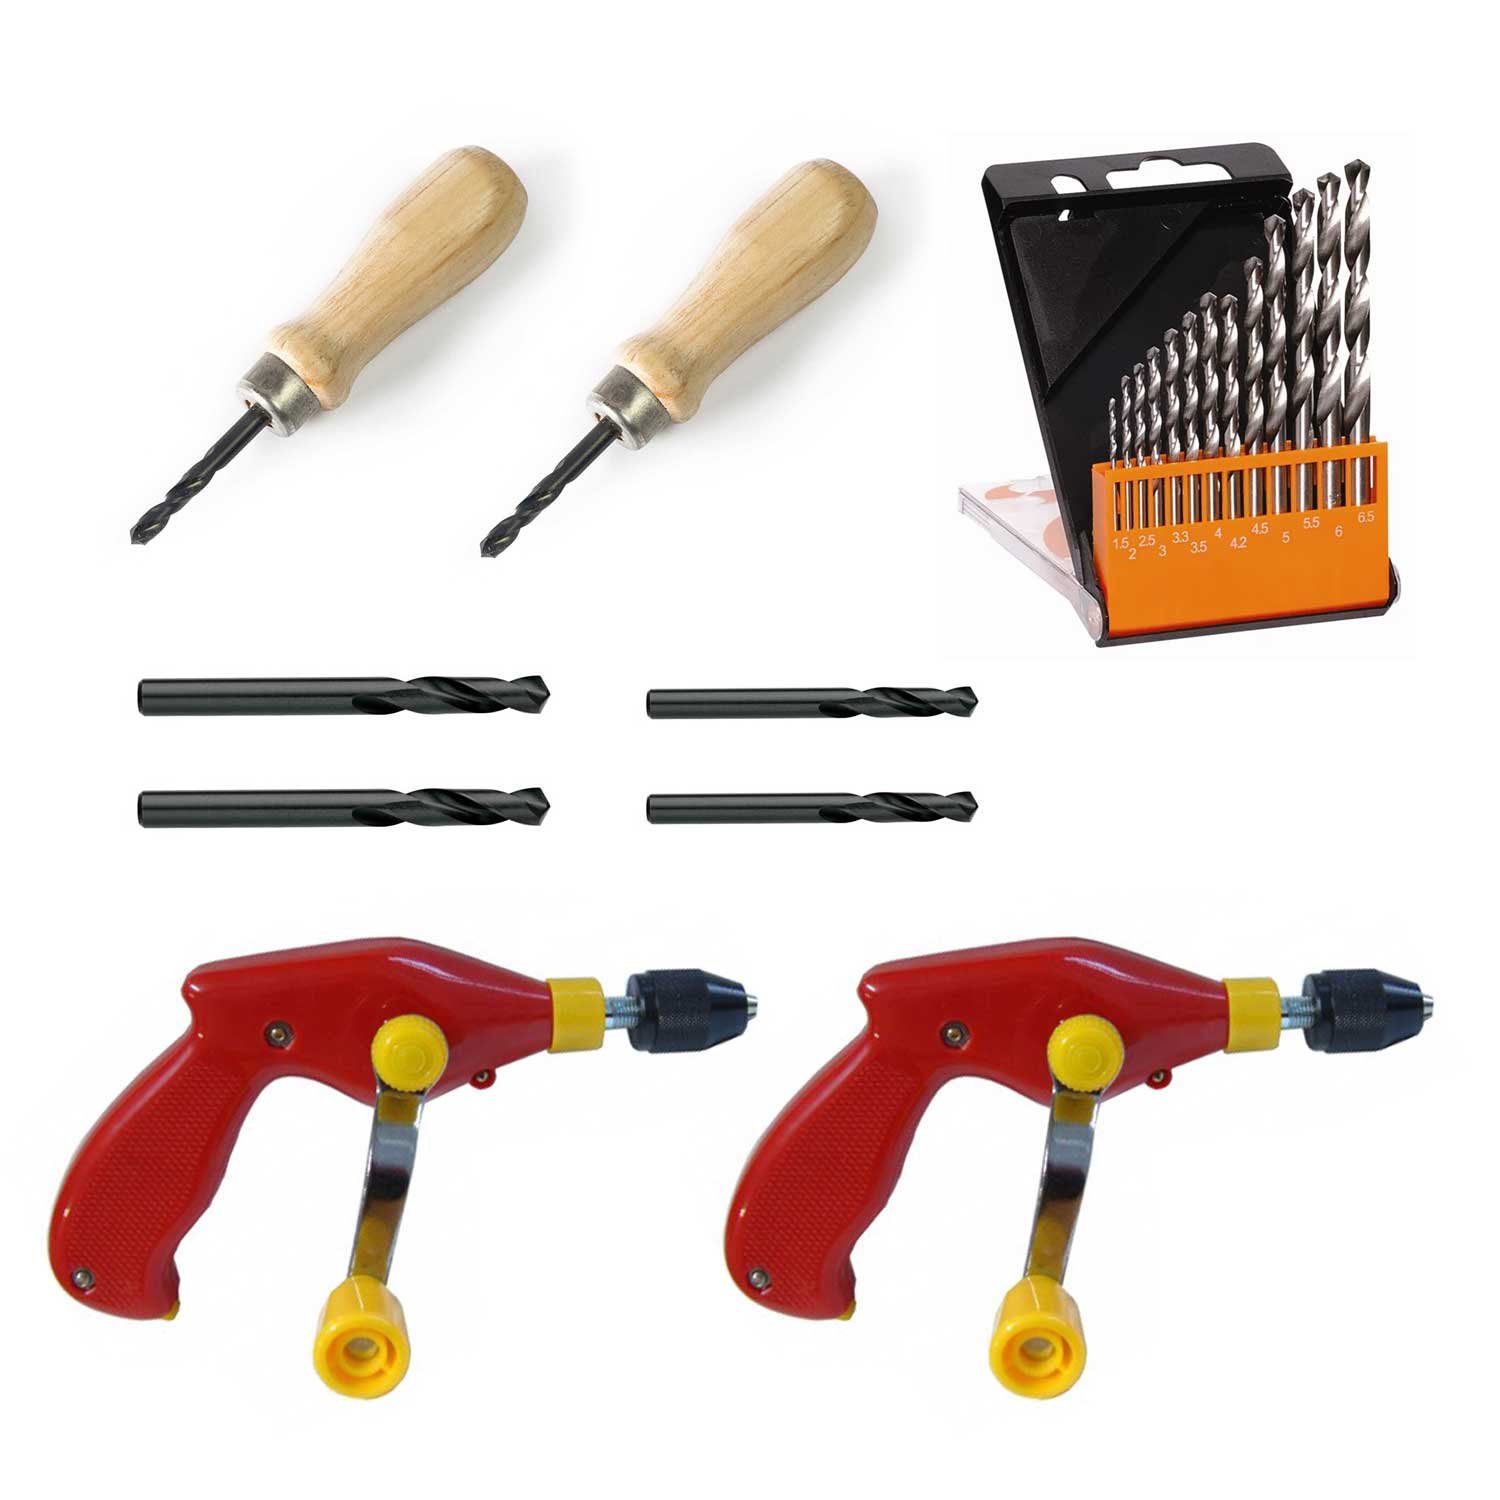 Hand Drilling Set for Education